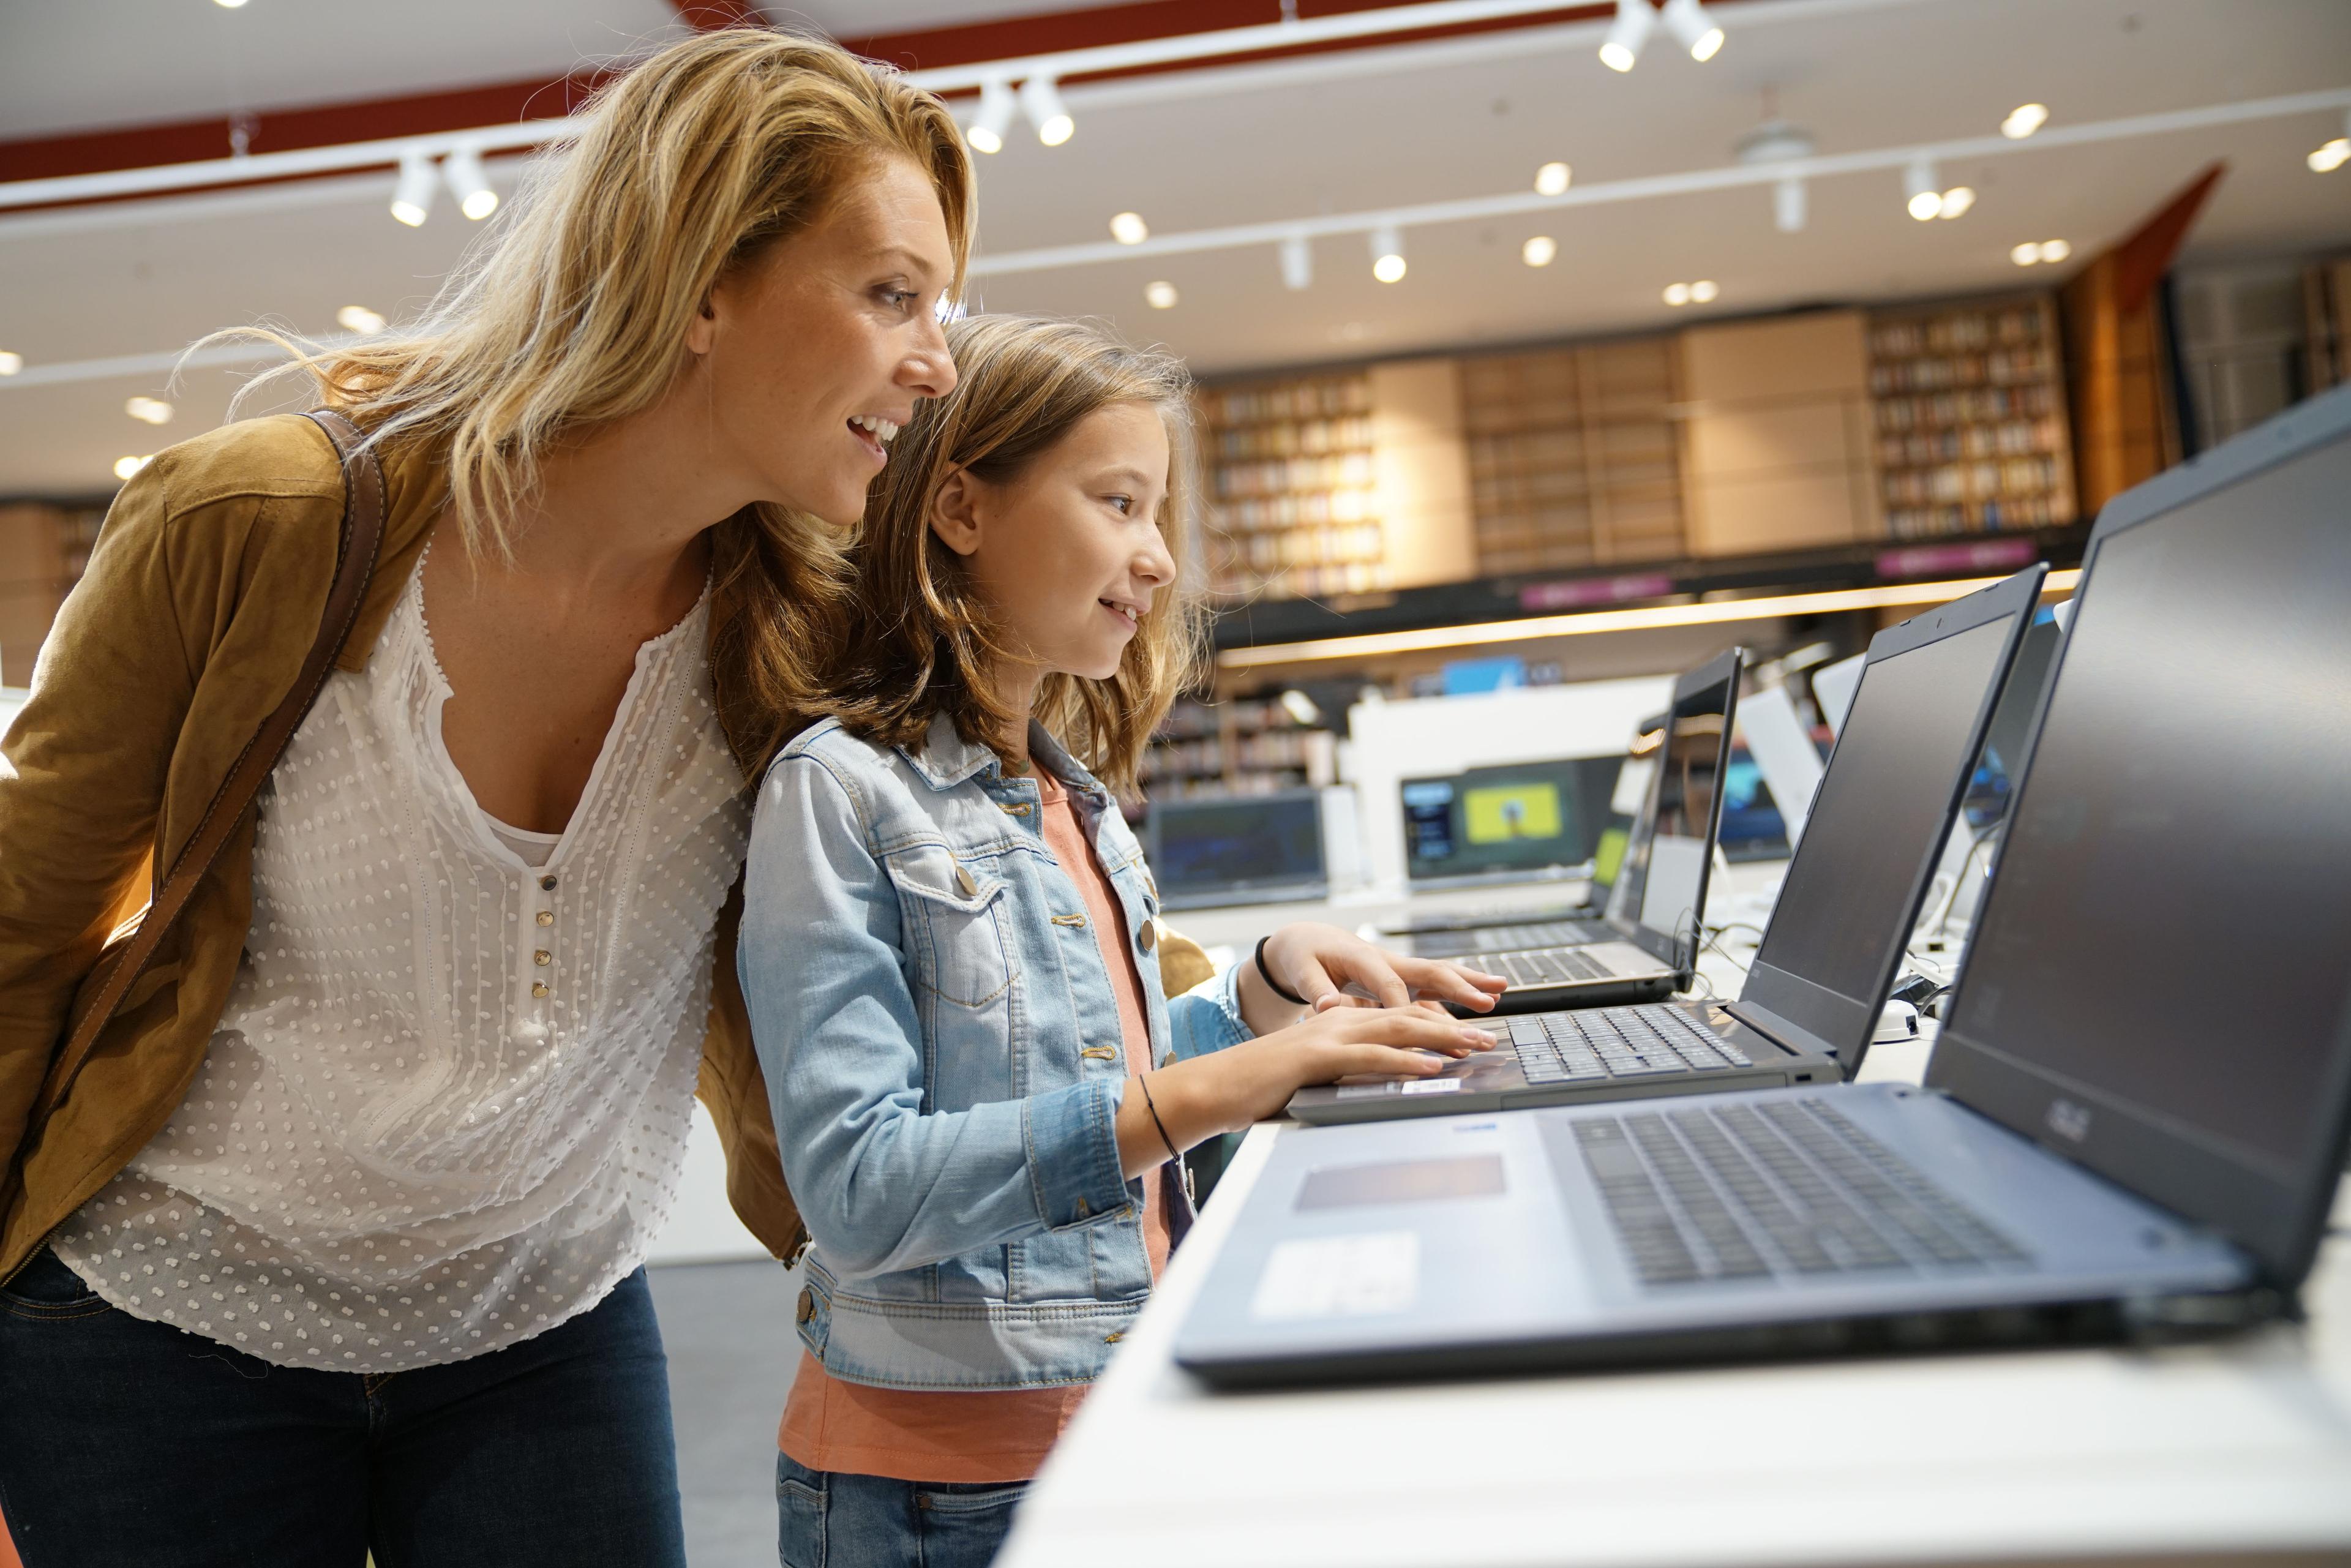 A woman and a child are looking at a laptop in an electronic store. This shows how Acima Leasing is useful during the back-to-school season.